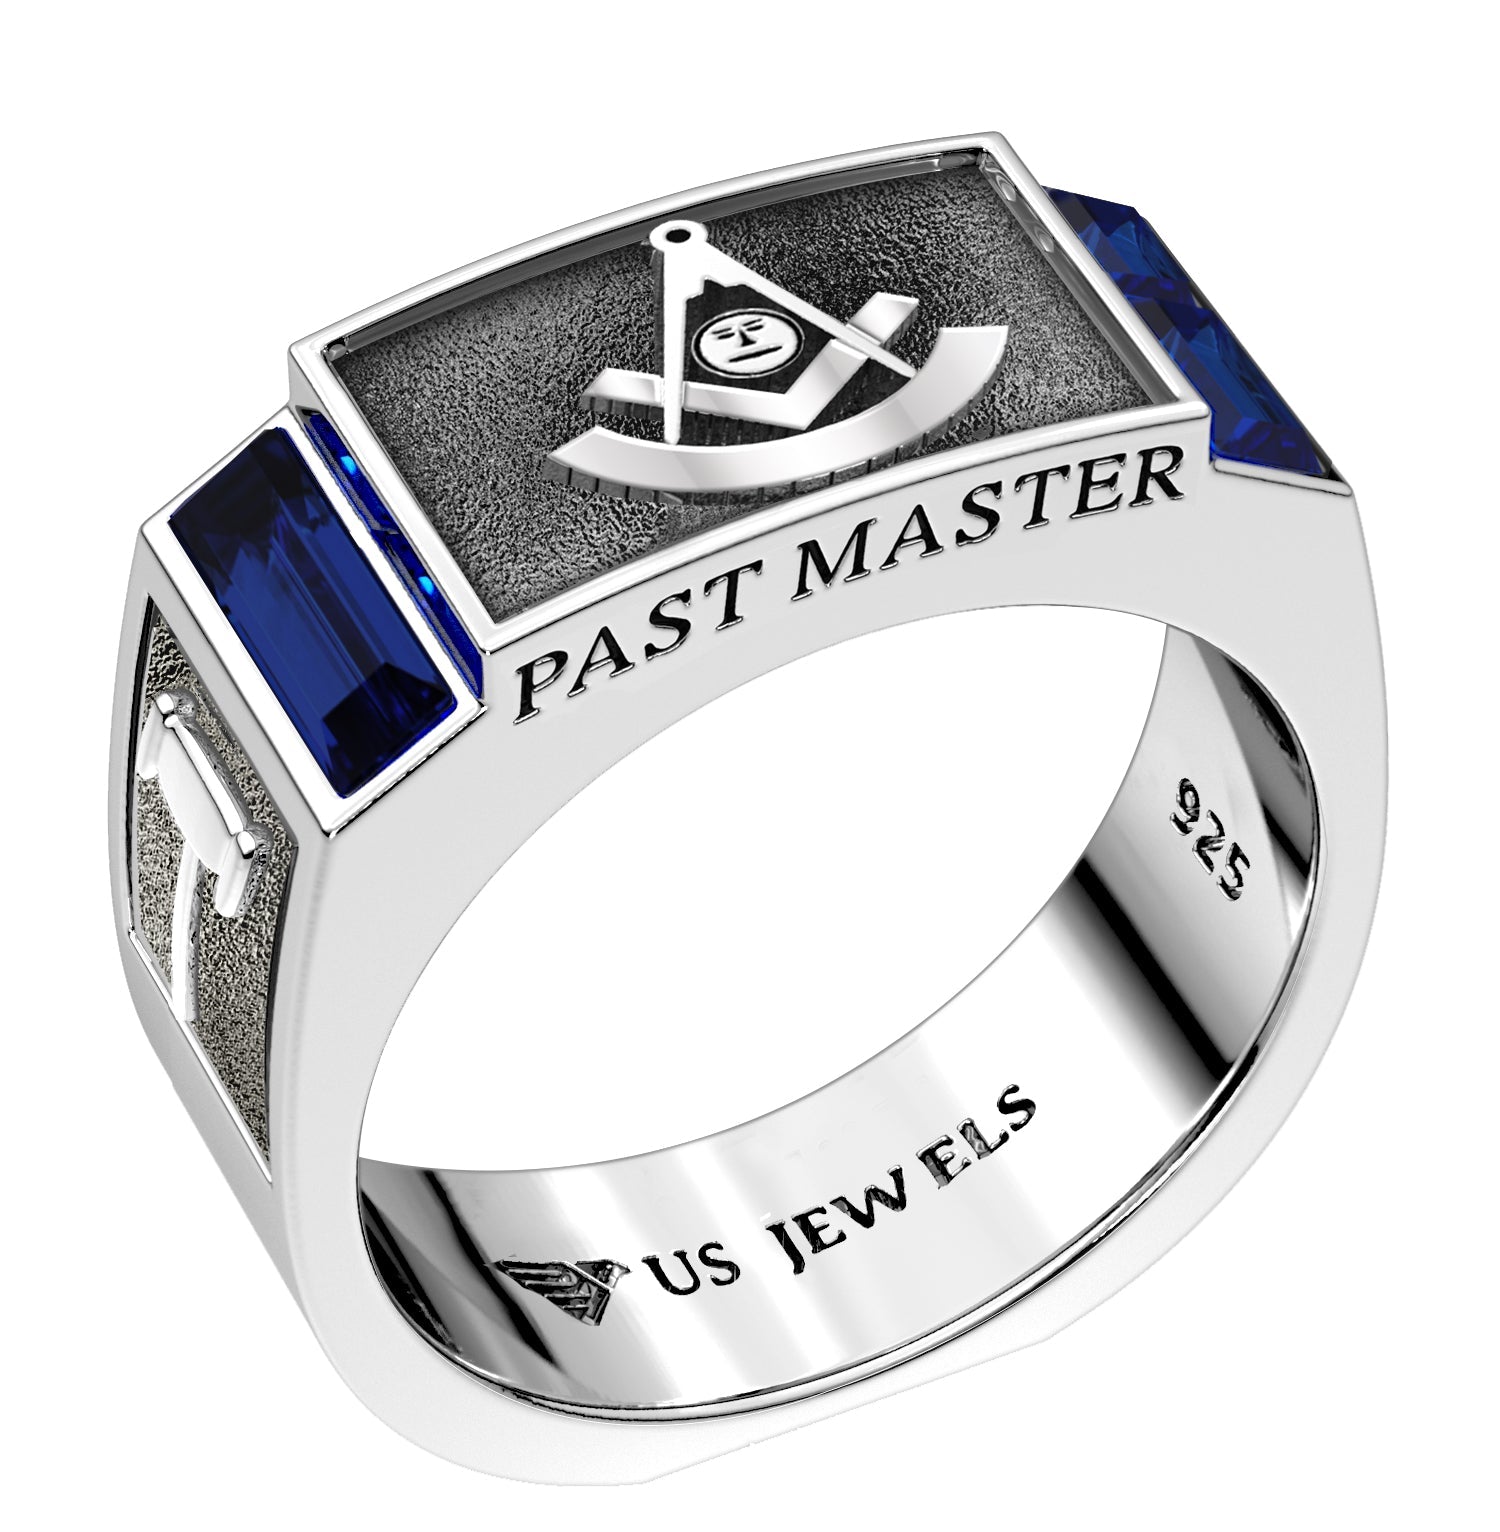 Men's 8mm 925 Sterling Silver Past Master Synthetic Sapphire Masonic Ring Band - US Jewels